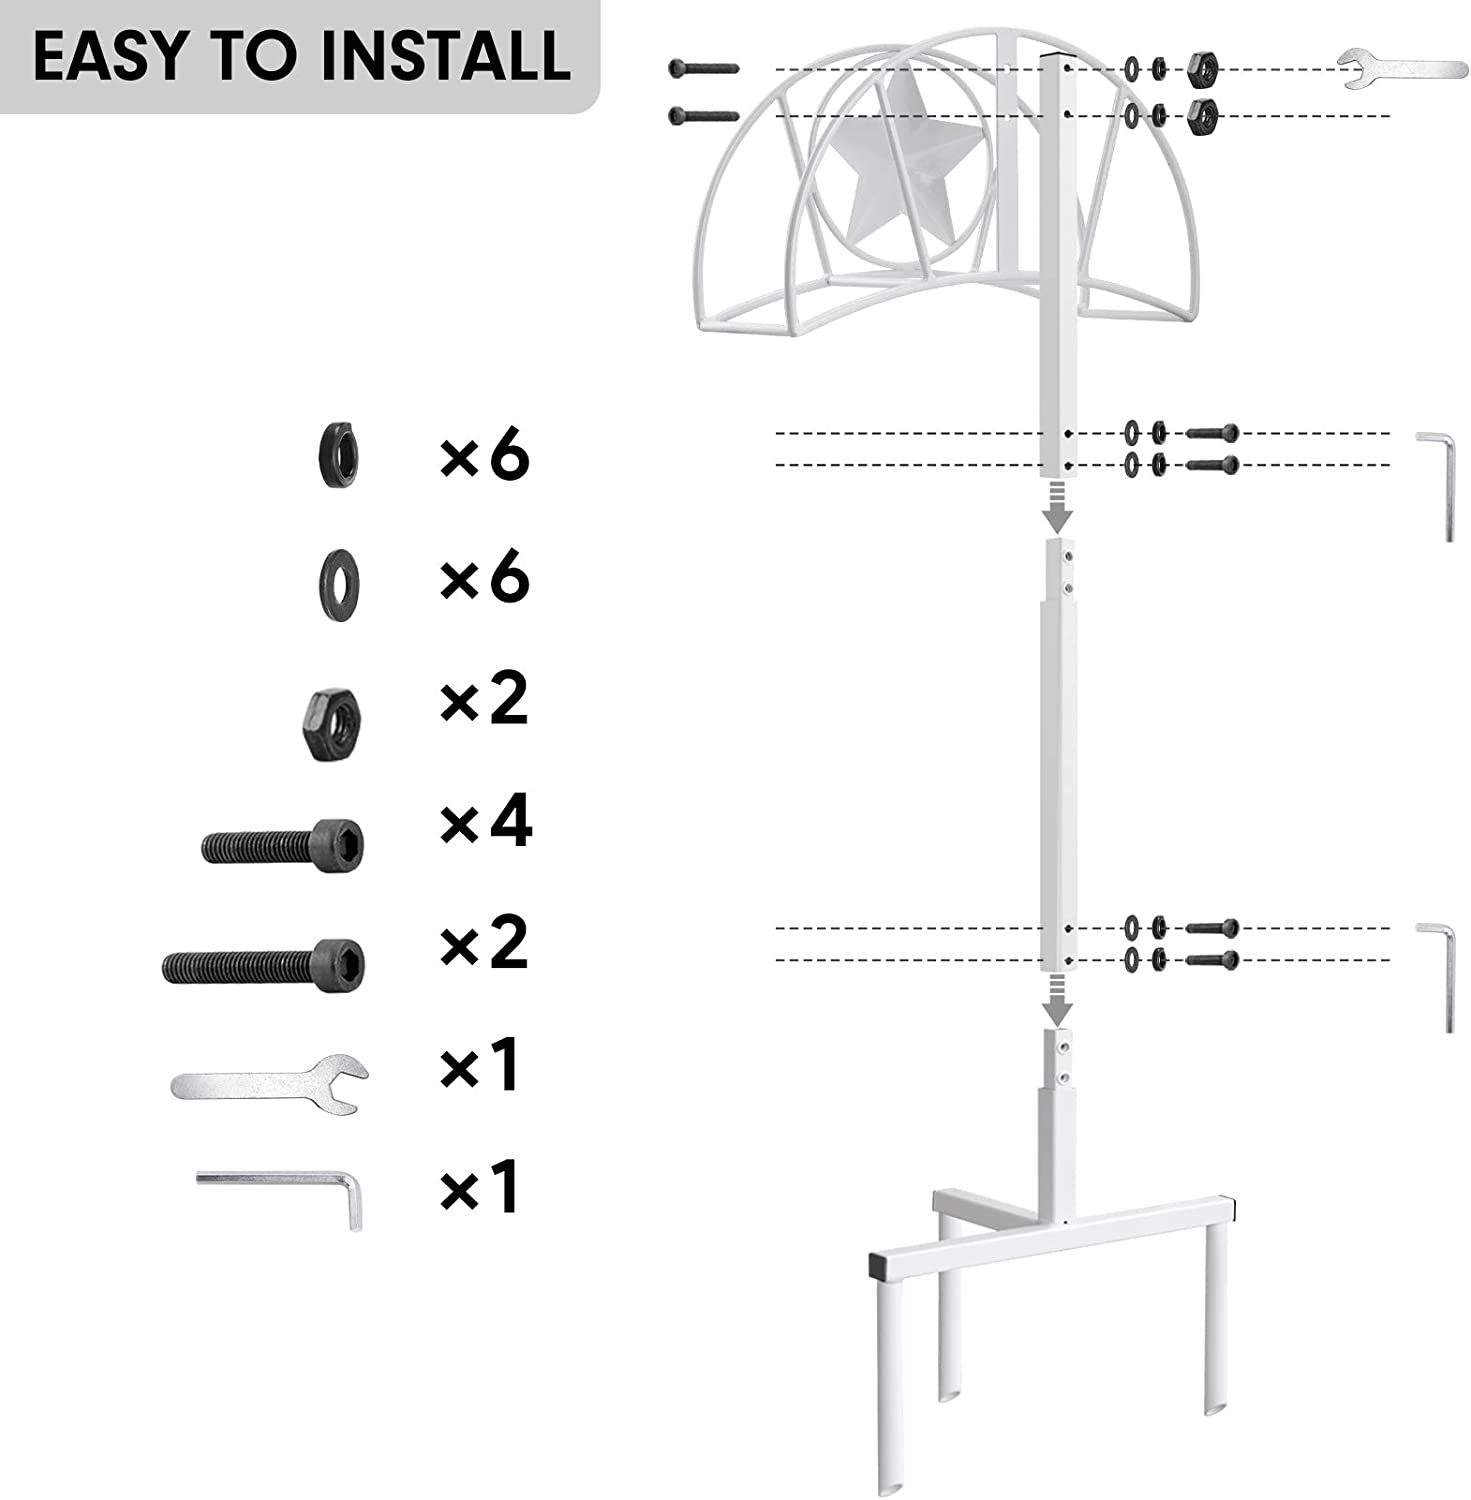 Amagabeli Garden Hose Holder Hanger Stand Freestanding Holds 125ft Water Hose Detachable Rustproof Organizer Storage Metal Heavy Duty Decorative Star with Ground Stakes for Outside Lawn Yard White - image 4 of 8